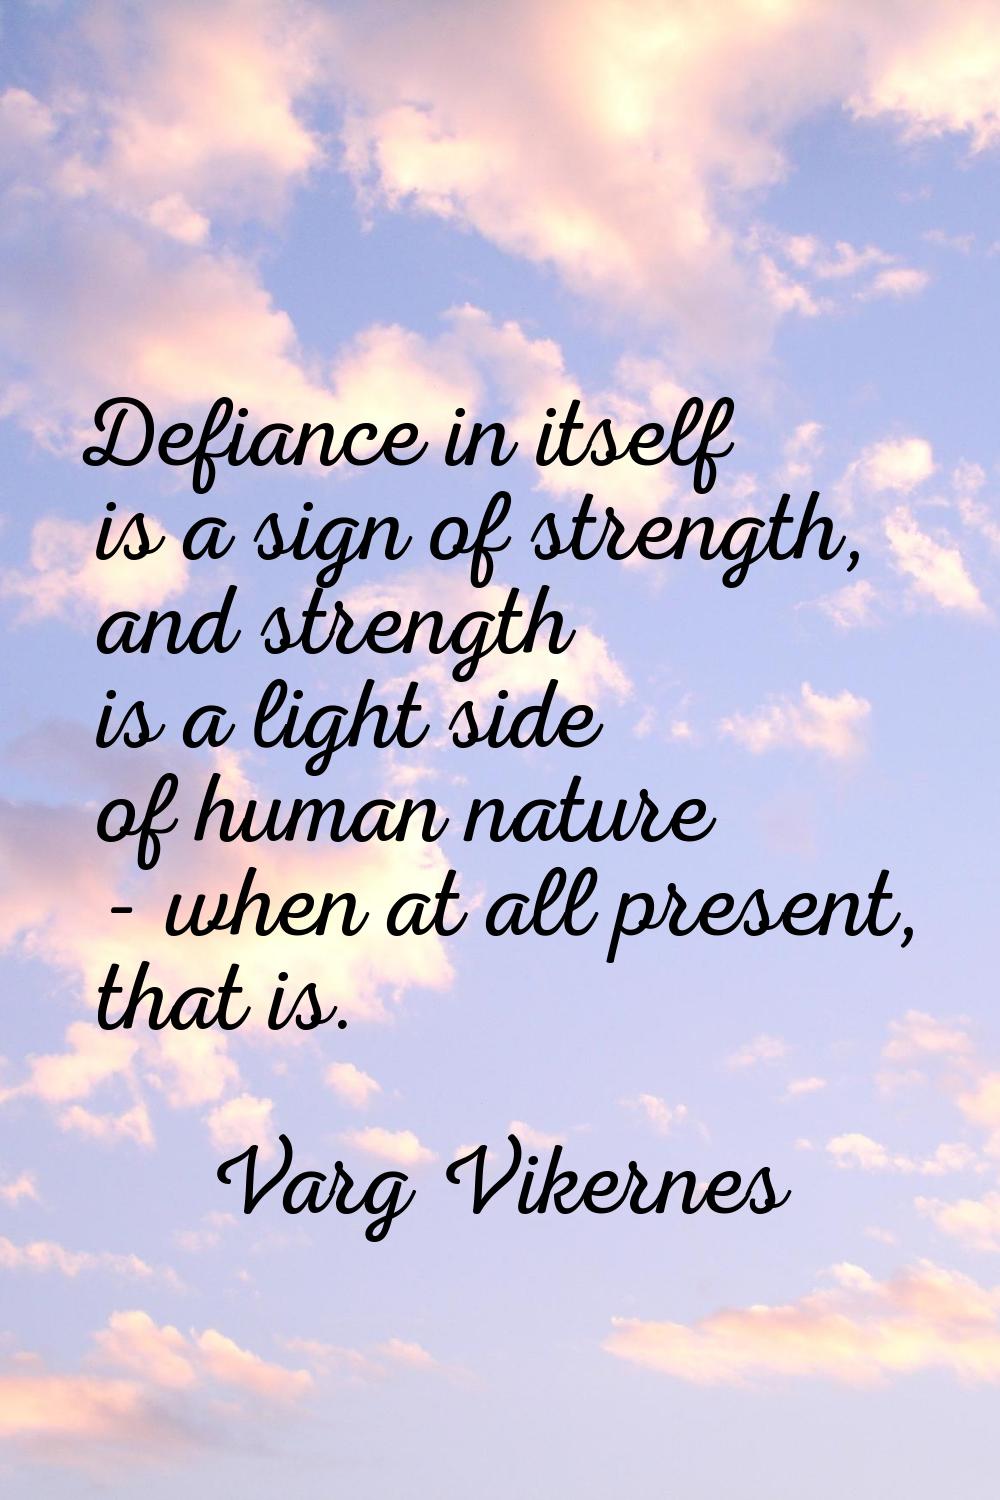 Defiance in itself is a sign of strength, and strength is a light side of human nature - when at al